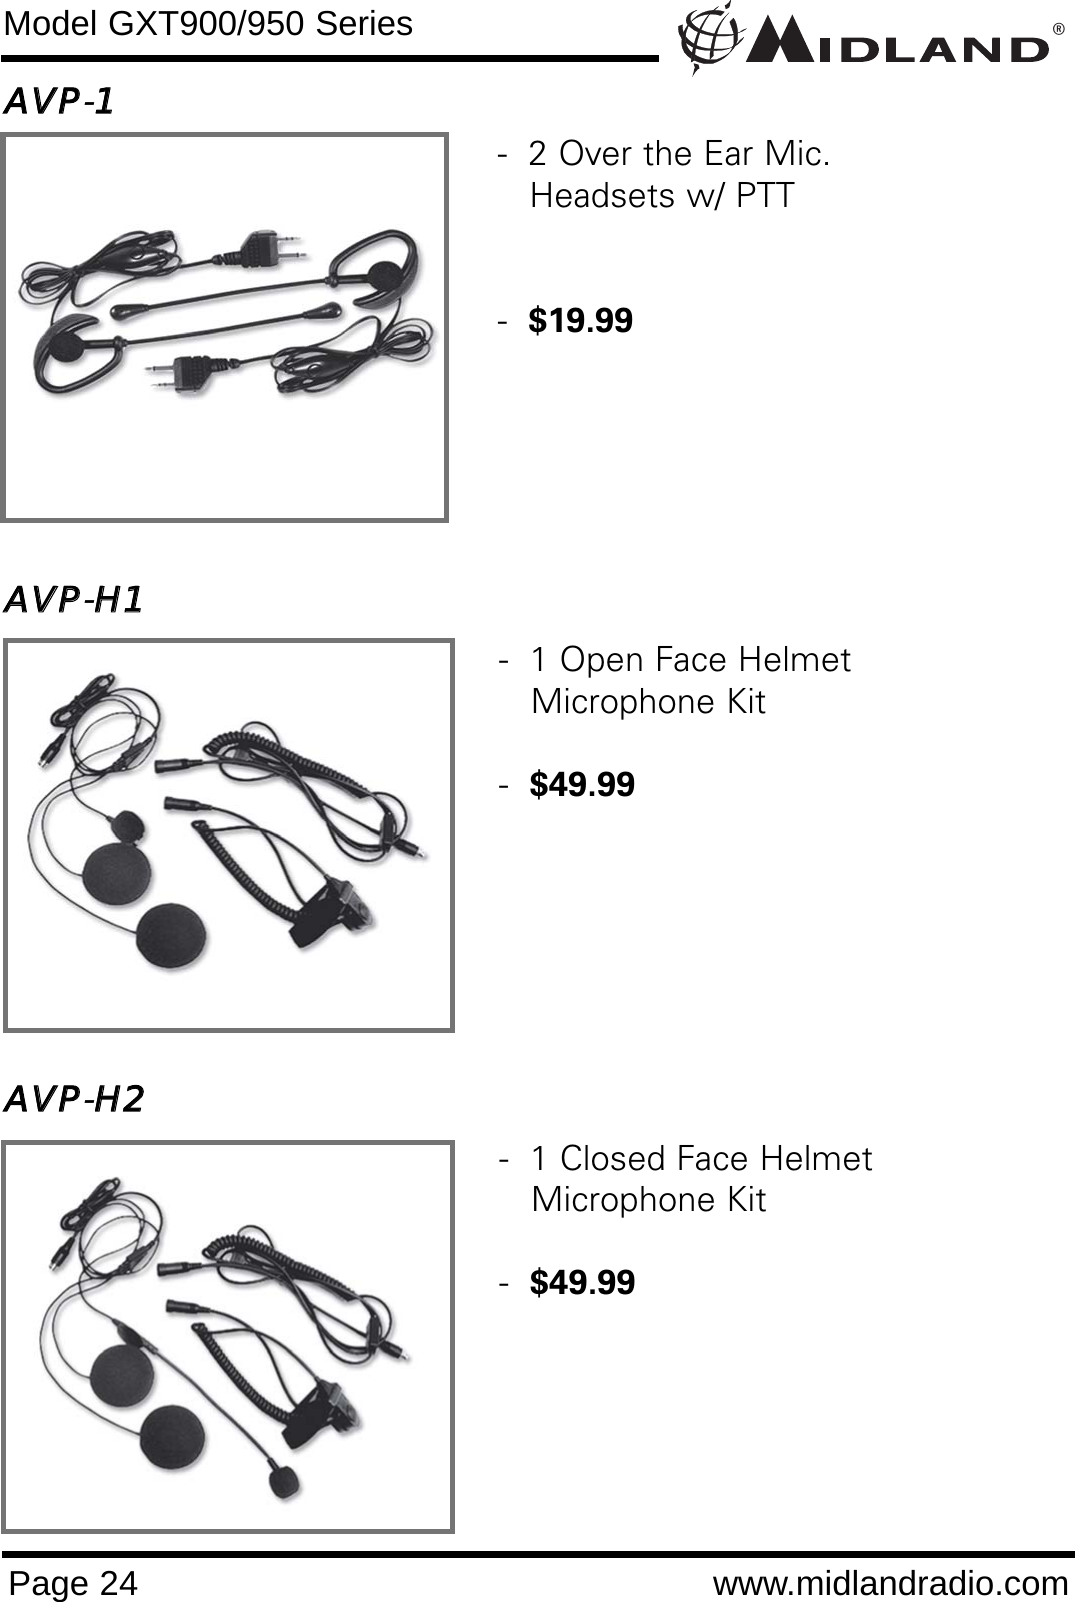 AAVVPP-11AAVVPP-HH11AAVVPP-HH22®Page 24 www.midlandradio.comModel GXT900/950 Series-  1 Open Face Helmet Microphone Kit-  $49.99-  1 Closed Face HelmetMicrophone Kit-  $49.99-  2 Over the Ear Mic. Headsets w/ PTT-  $19.99